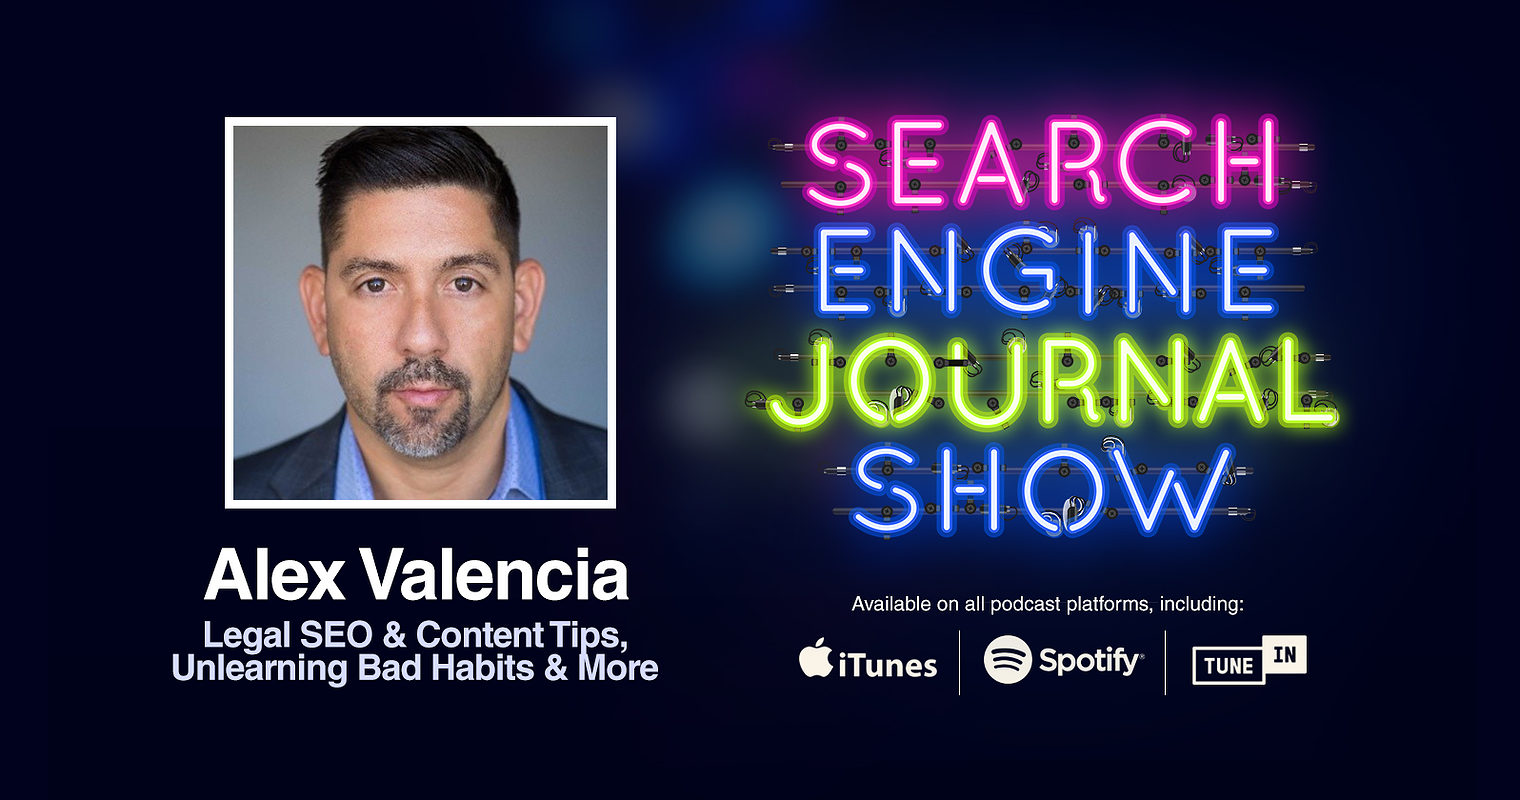 Legal SEO & Content Tips, Unlearning Bad Habits & More with Alex Valencia [PODCAST]